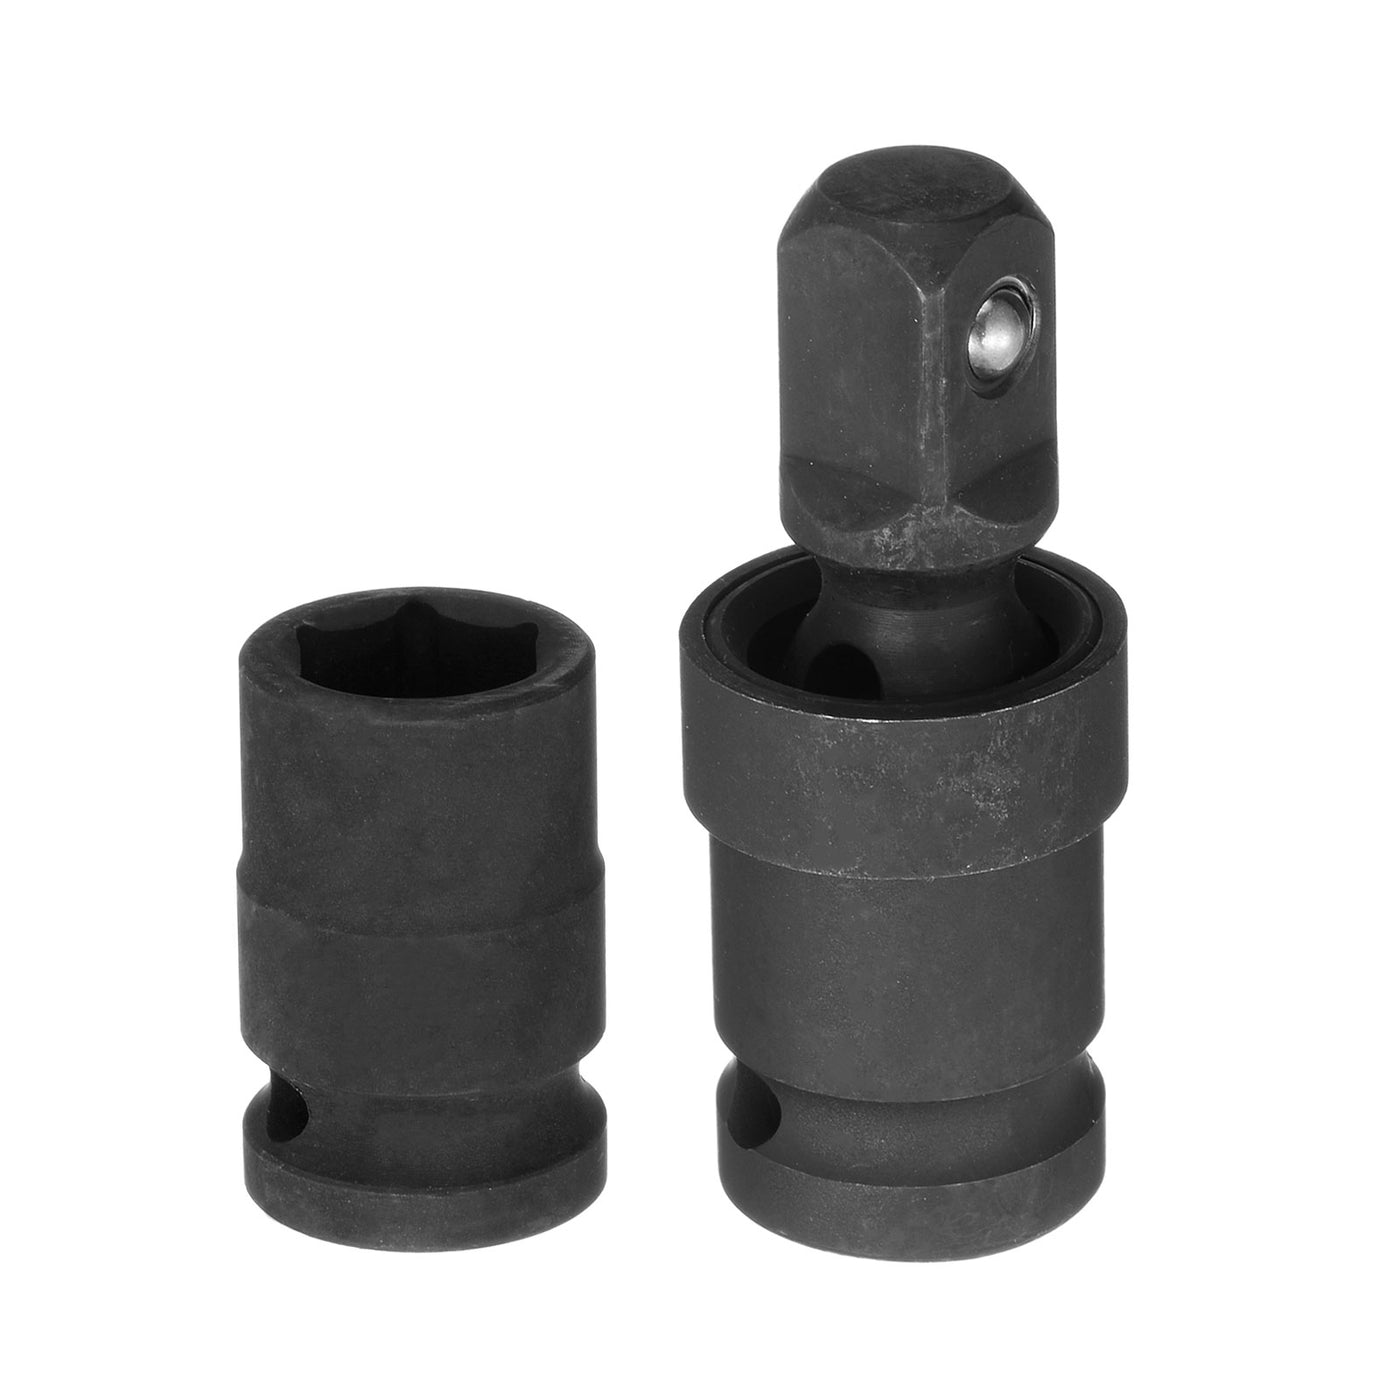 Harfington 15mm Impact Shallow Socket 1/2" Drive CR-MO Steel with 360° Universal Joint